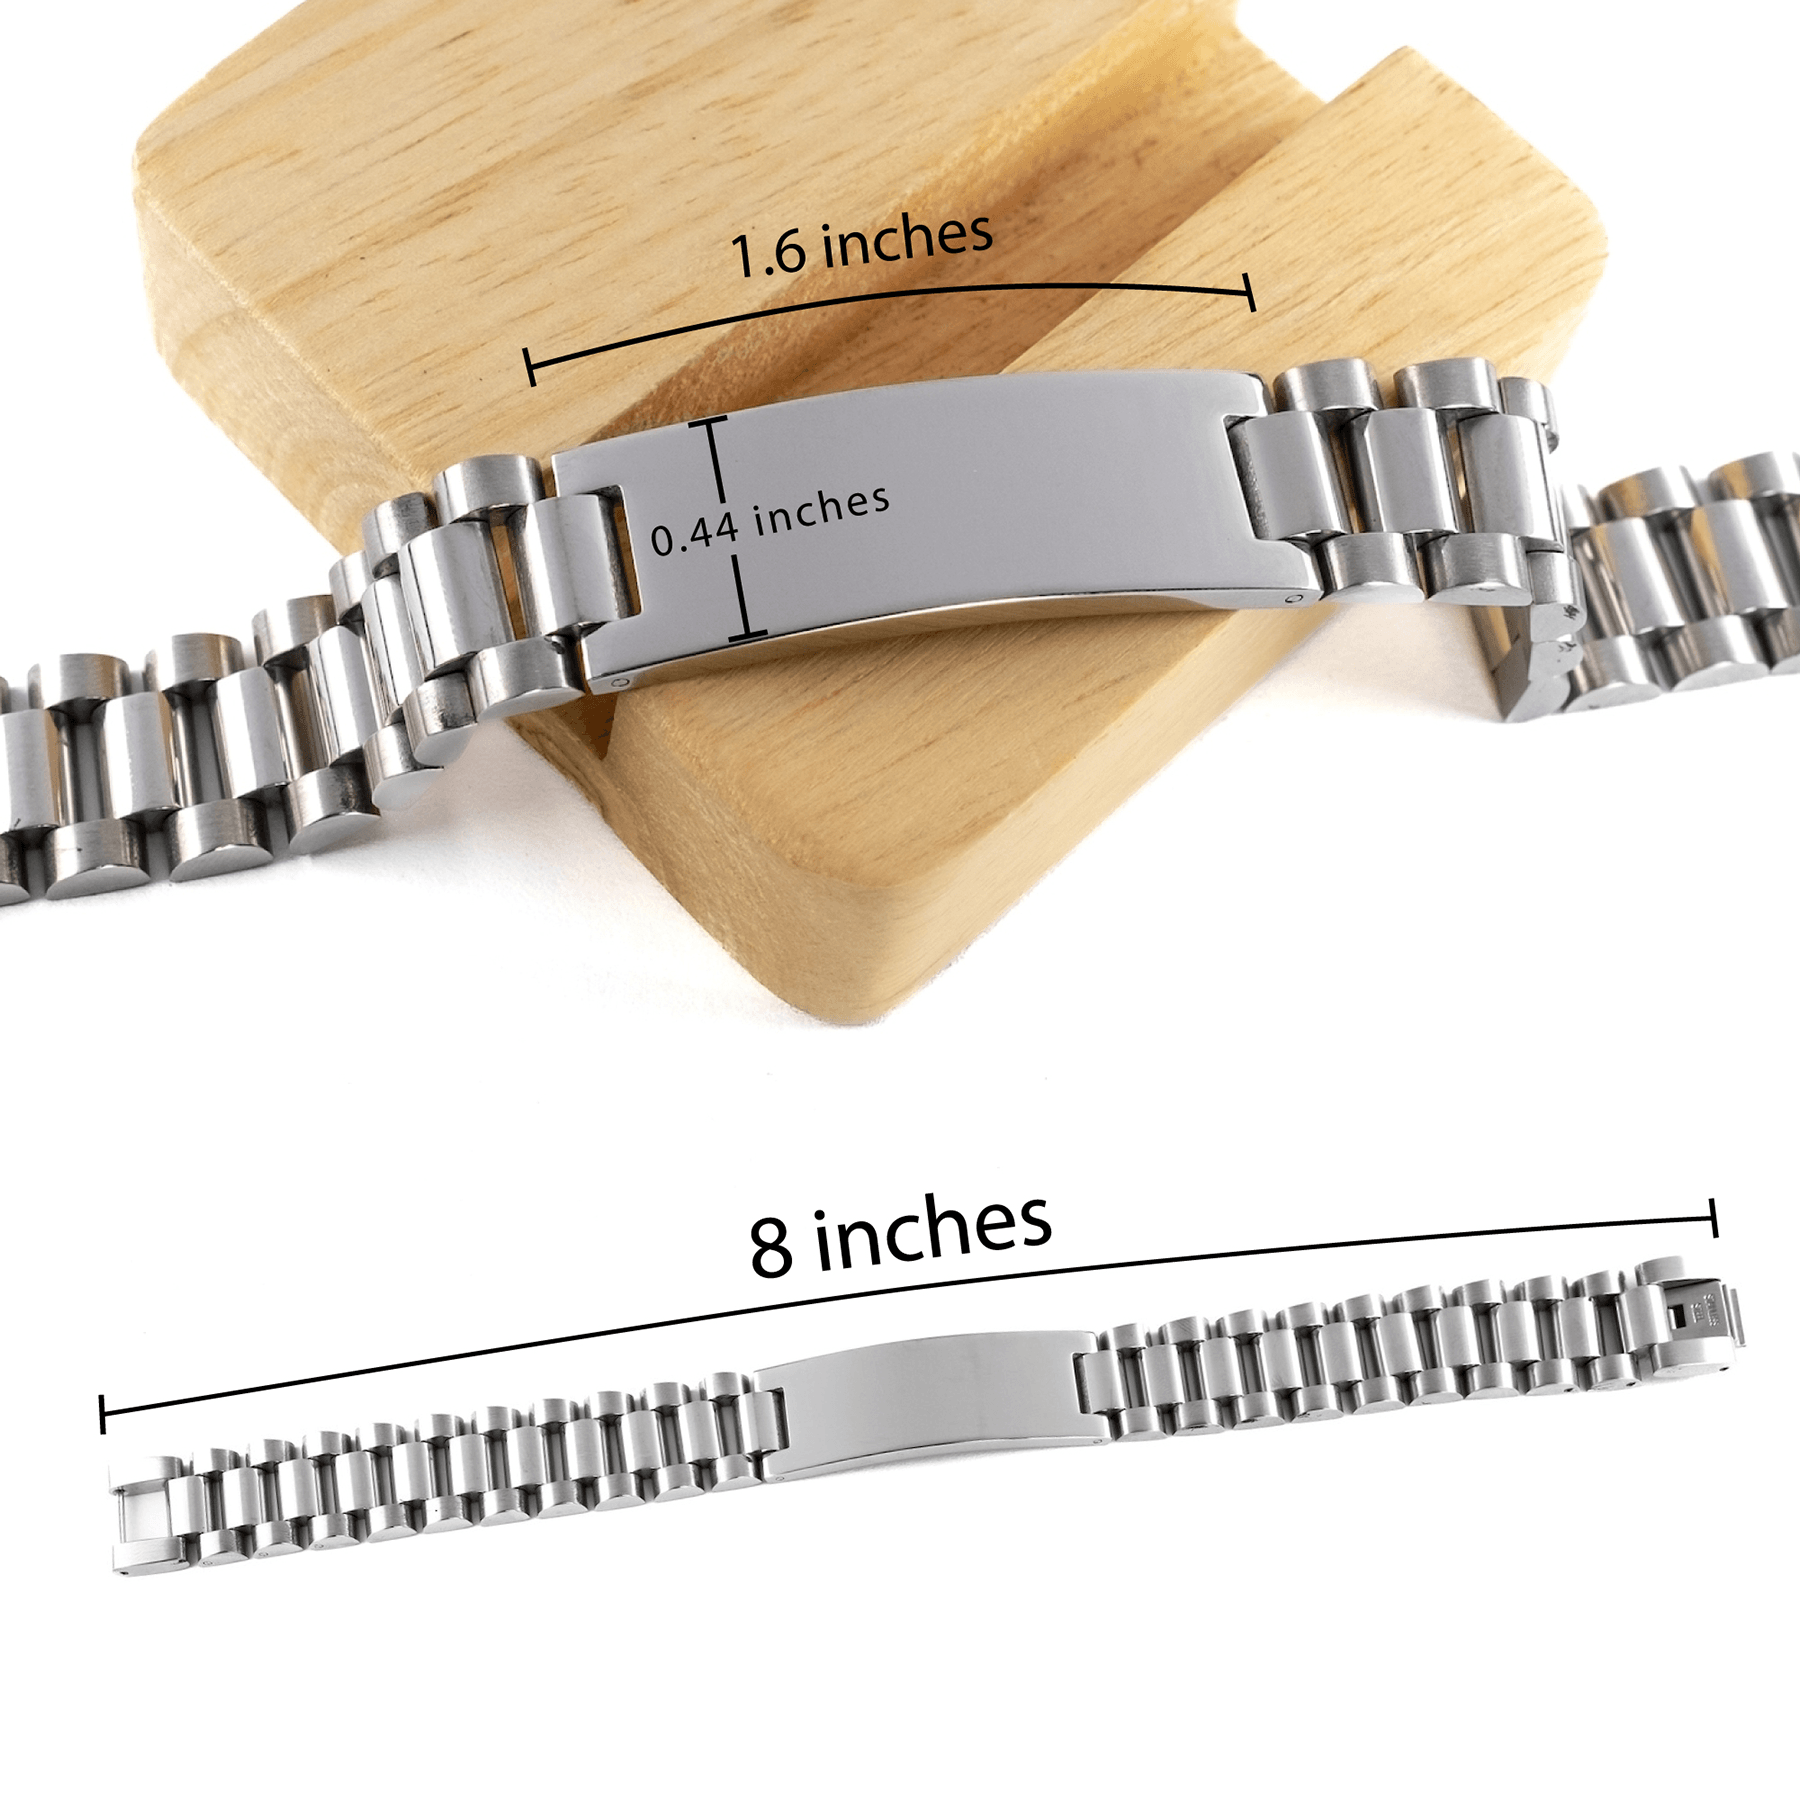 Anesthesiologist Ladder Stainless Steel Engraved Bracelet - Thanks for being who you are - Birthday Christmas Jewelry Gifts Coworkers Colleague Boss - Mallard Moon Gift Shop